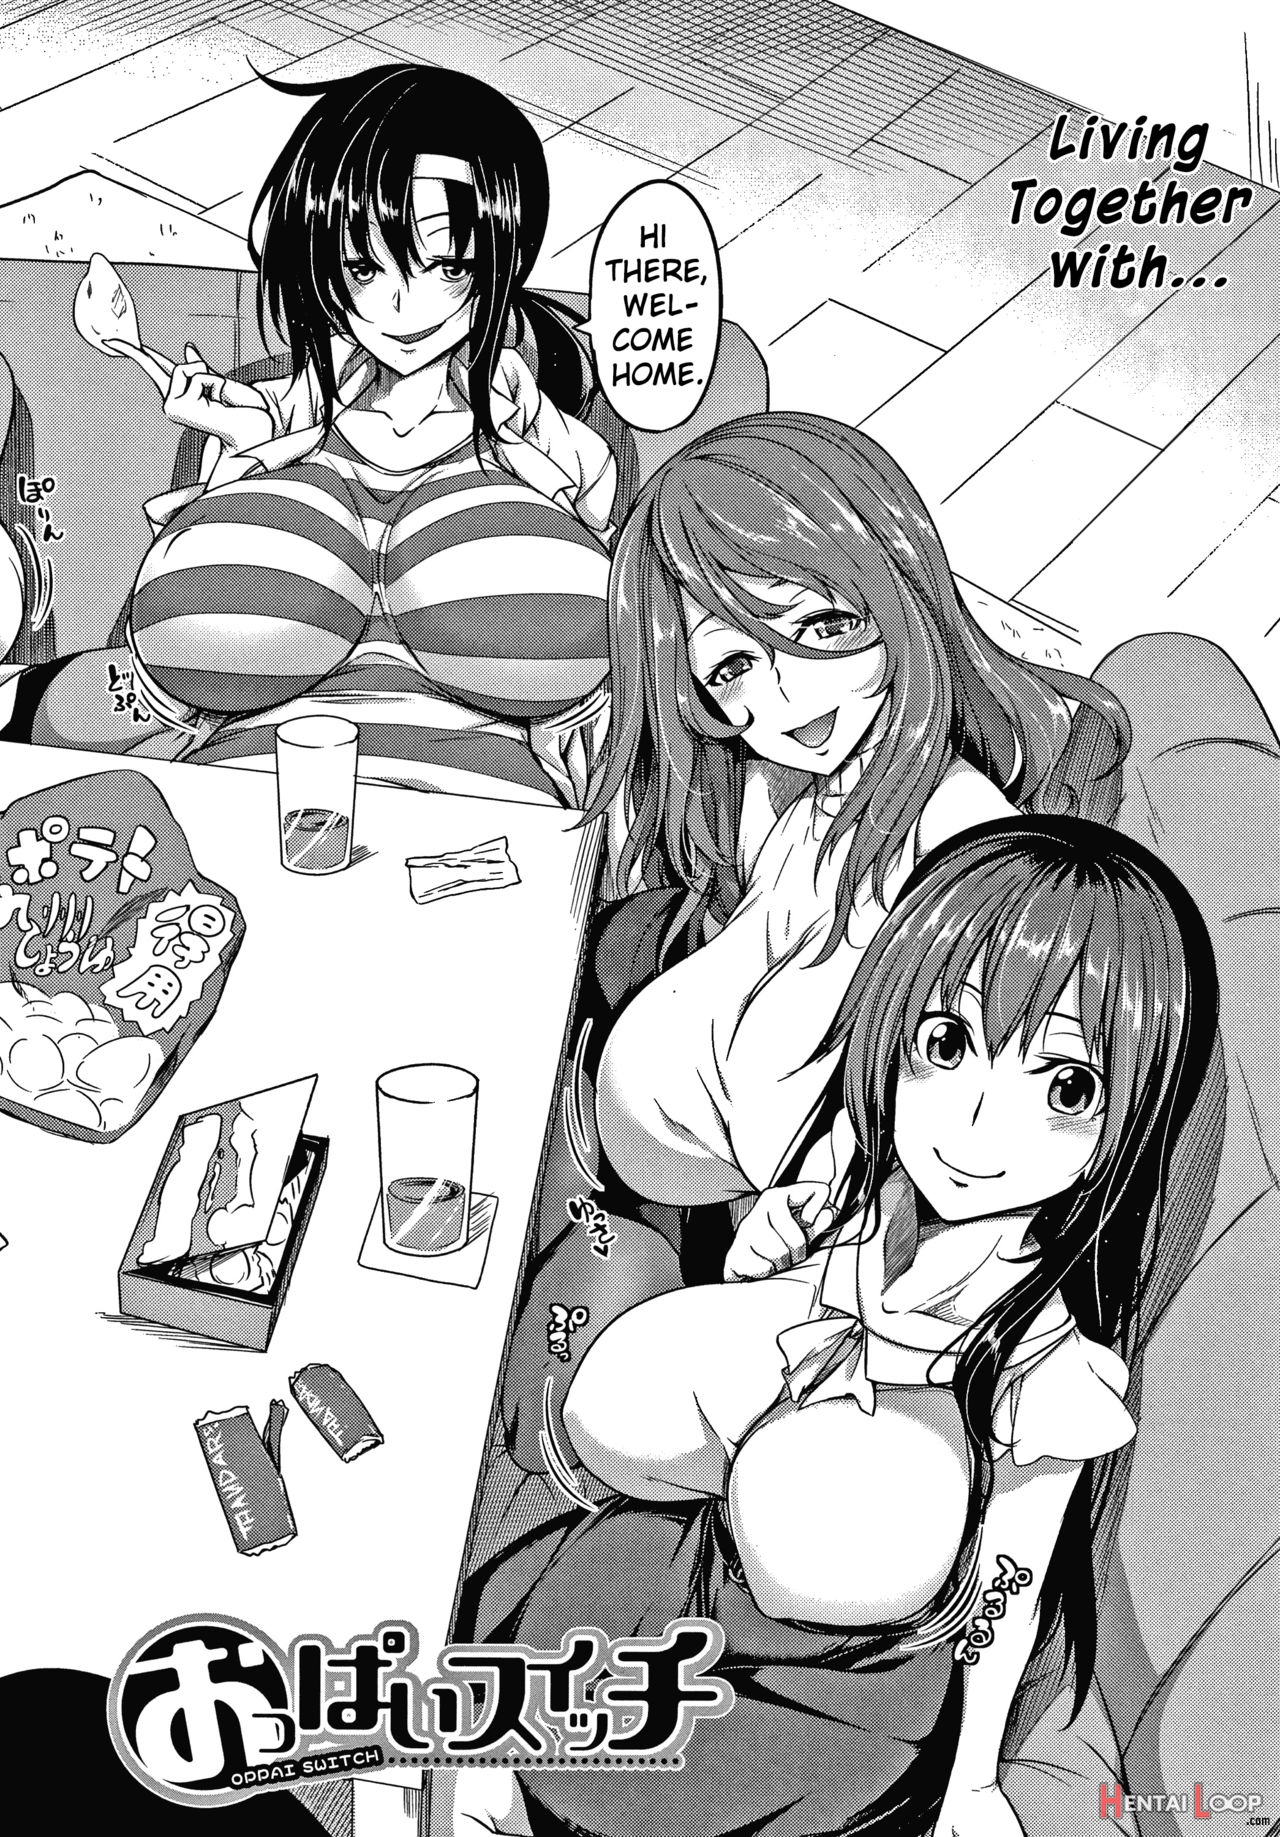 Oppai Switch Ch. 0-1 page 9